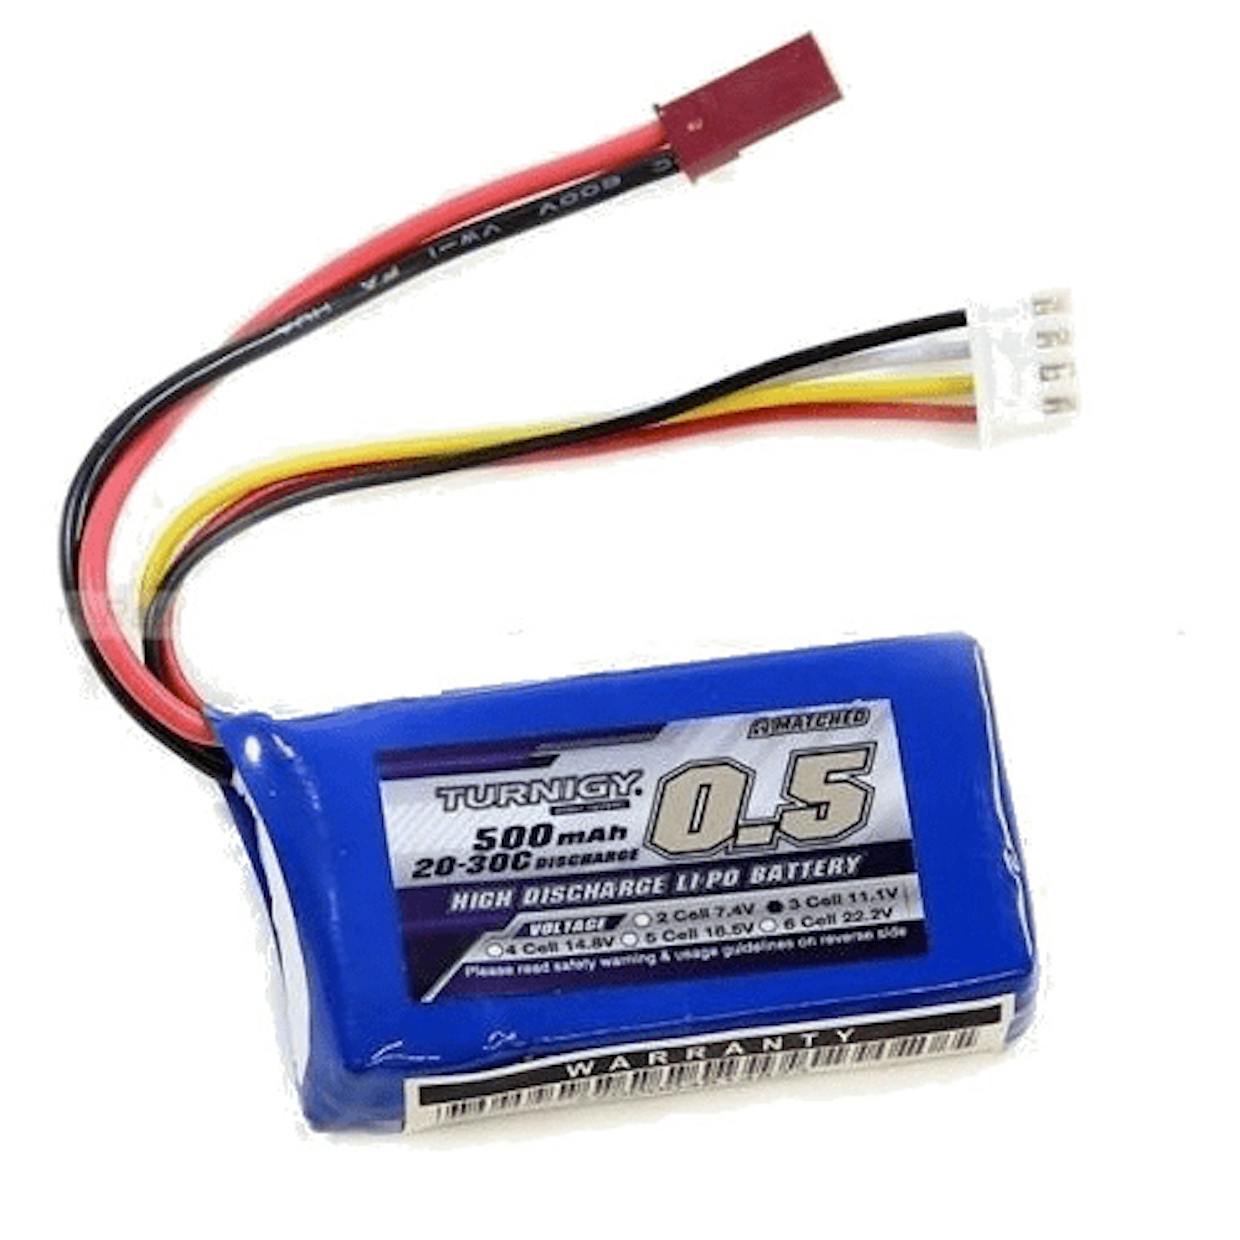 hello to all, I'm new I'm going to start my first Otto.

On the following article: https://www.ottodiy.com/blog/power there are different ways to power Otto, but in the kits sold they are all powered by a 9V rechargeable battery at the cost I wonder what it is must choose for a basic Otto.

Do you have a suggestion for me?

thank you